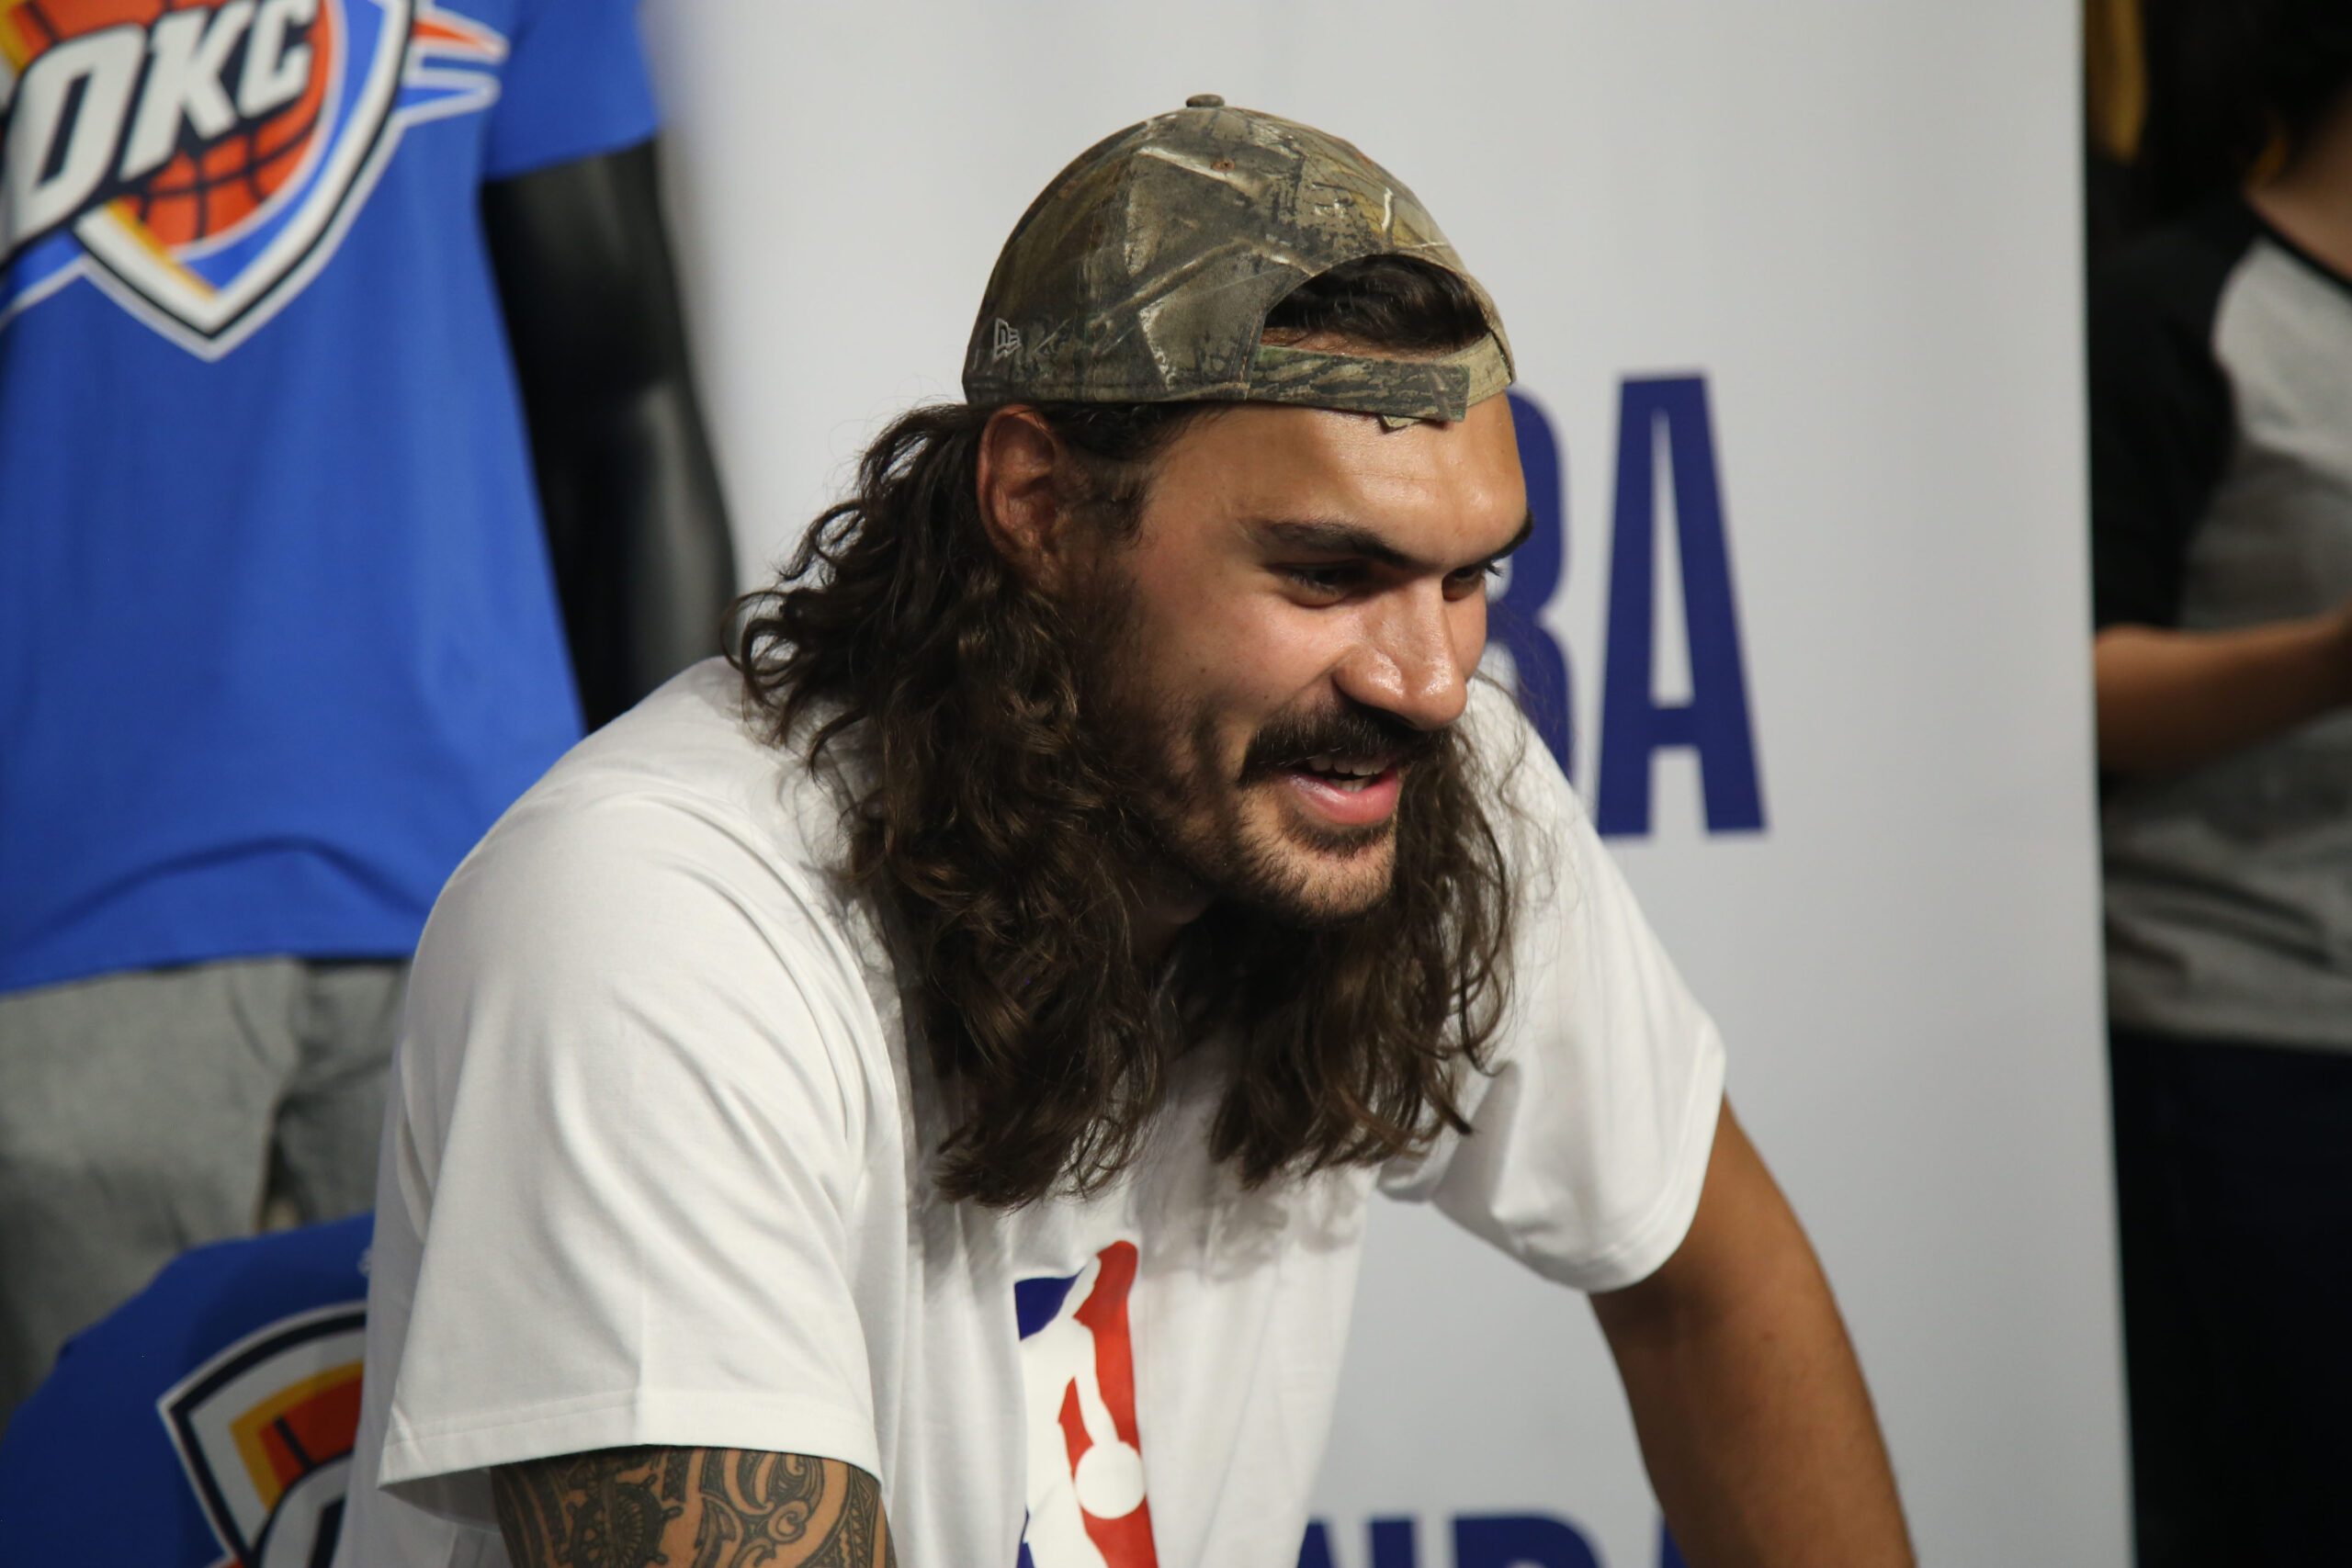 WATCH: Steven Adams on the NBA’s best facial hair and more